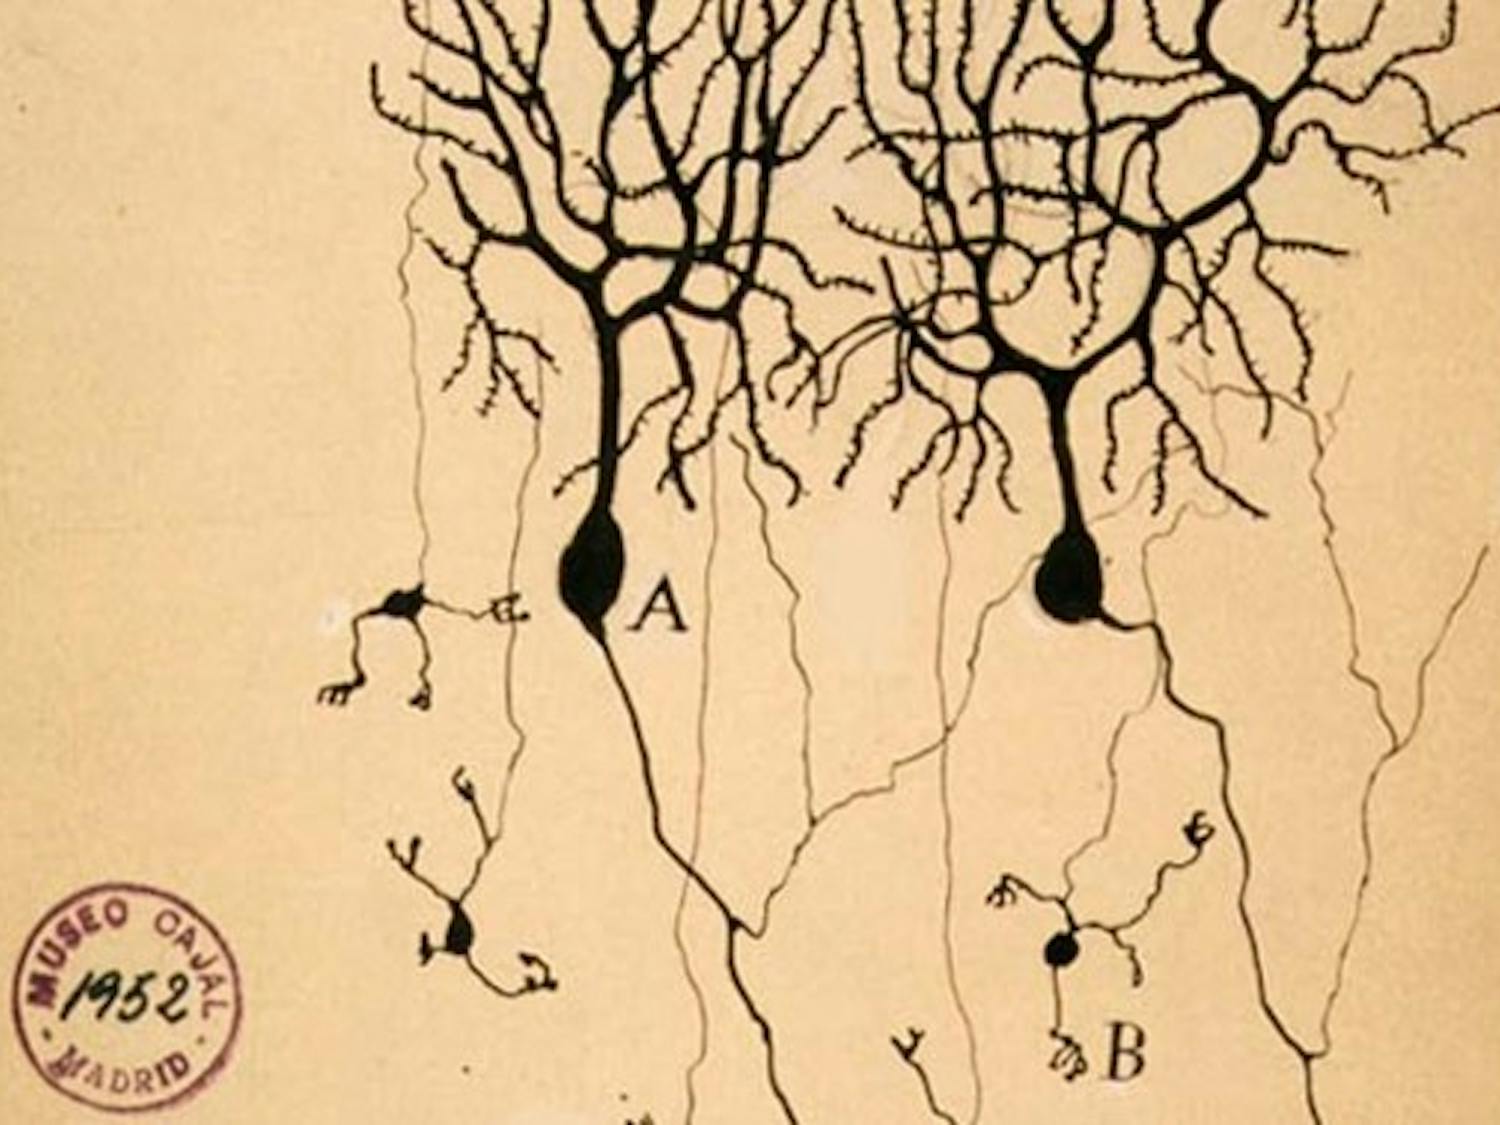 An 1899 illustration of the perception of neurons at the time.